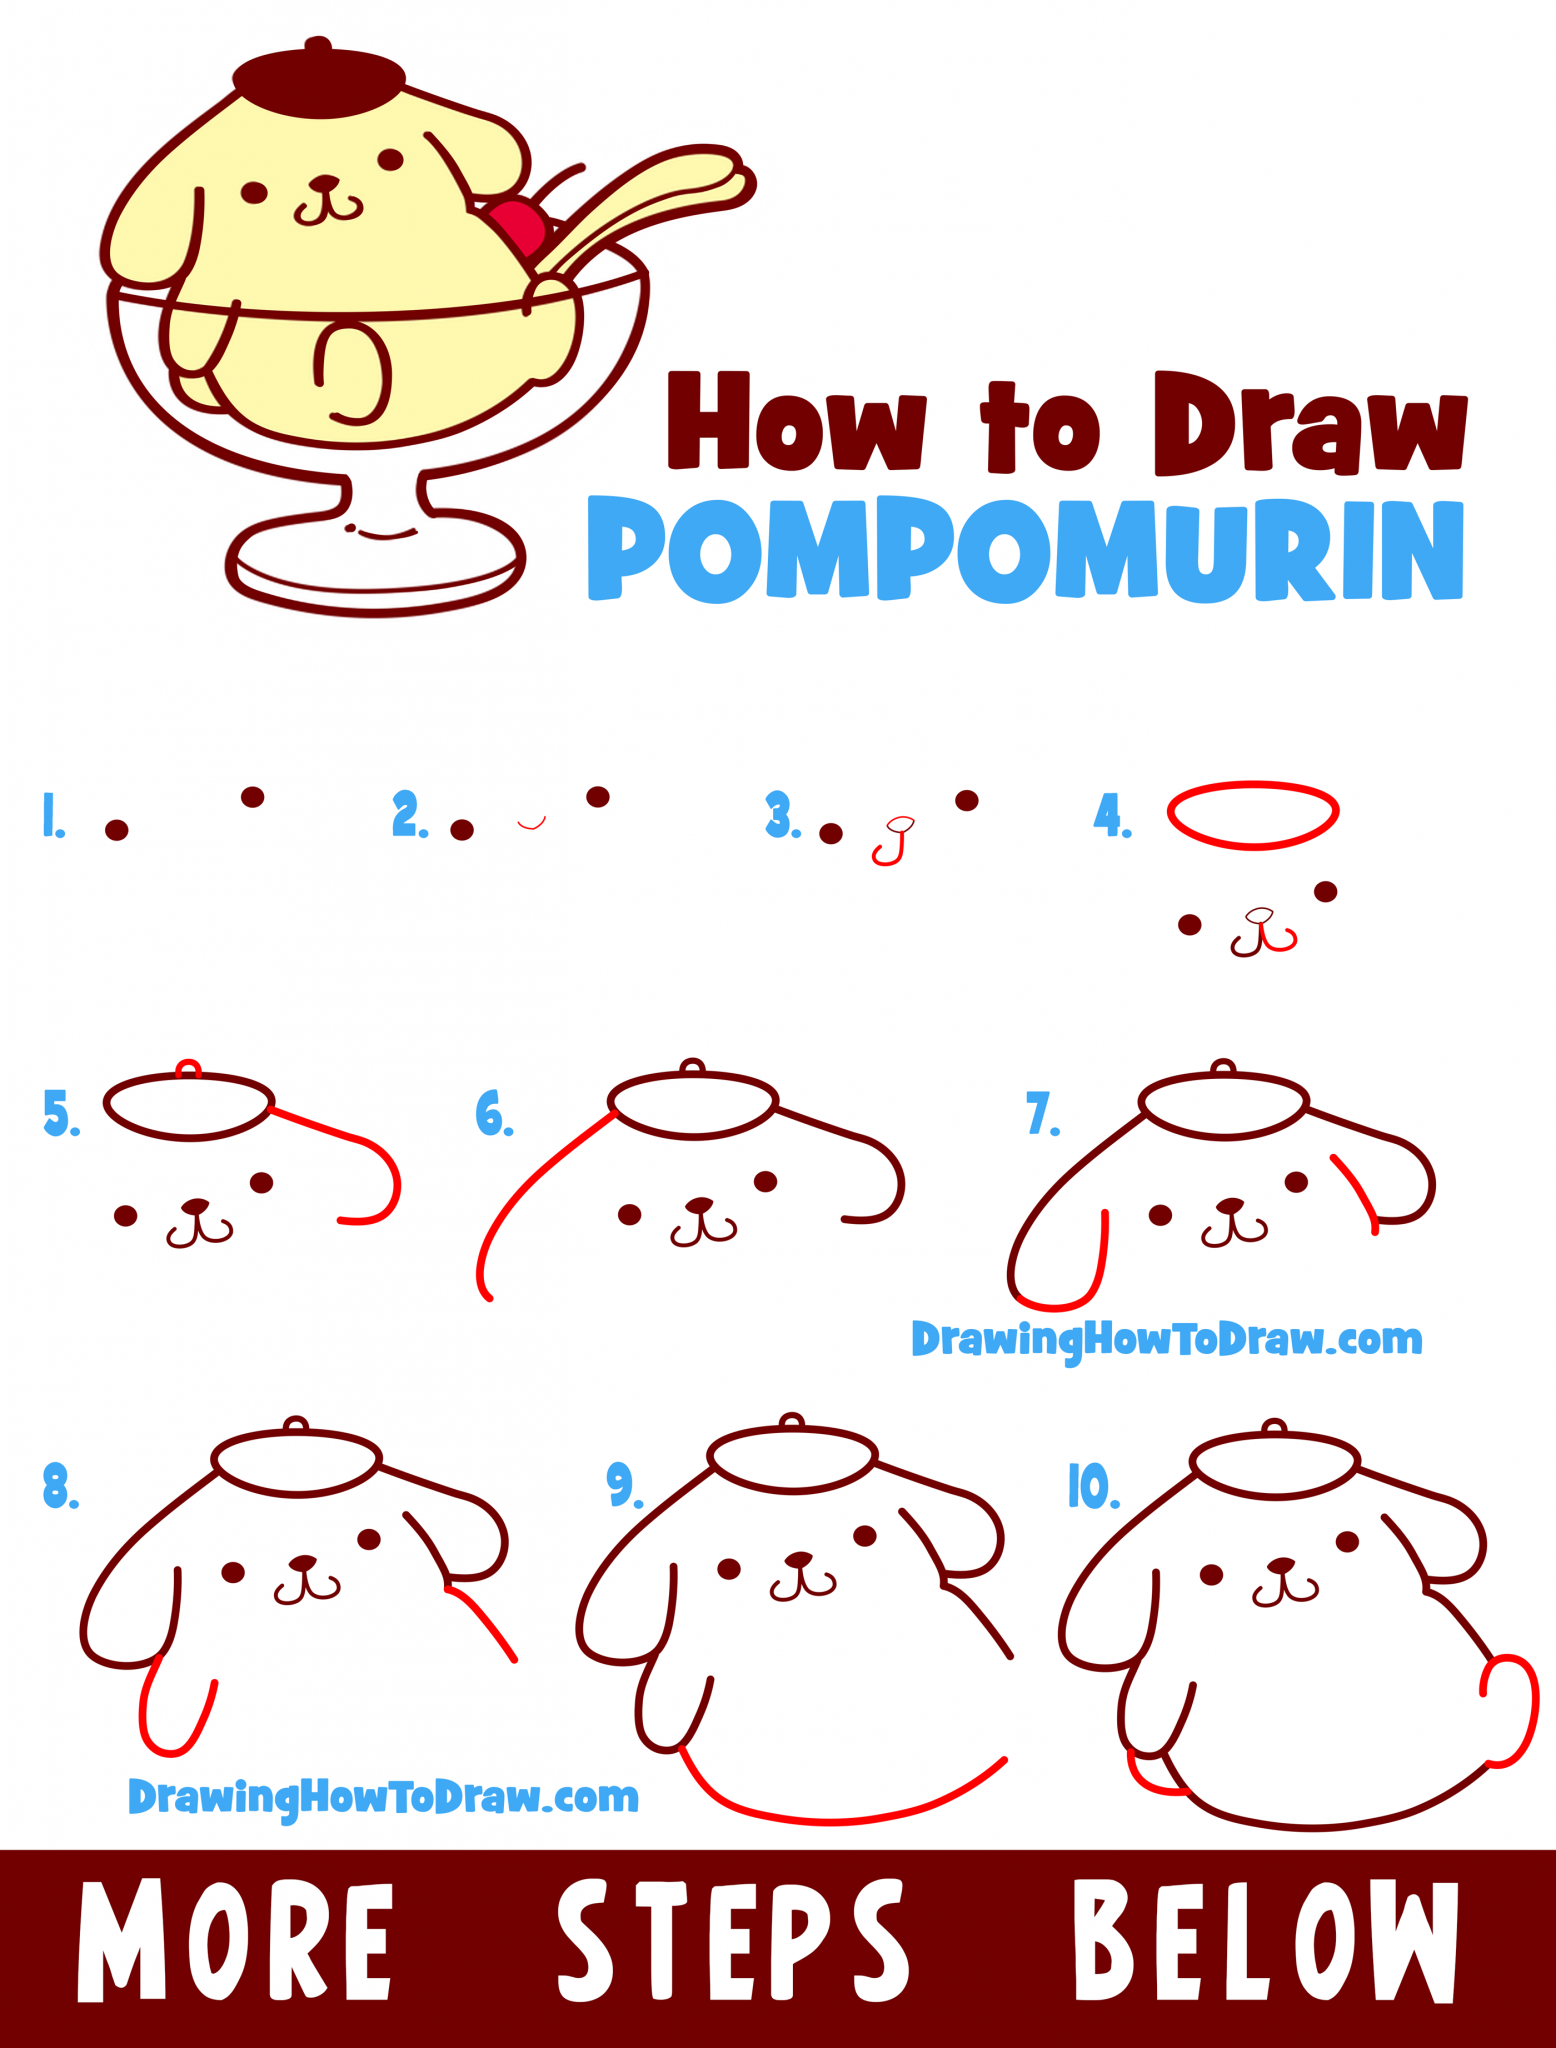 How to Draw Pompompurin from Hello Kitty Easy Step by Step Drawing